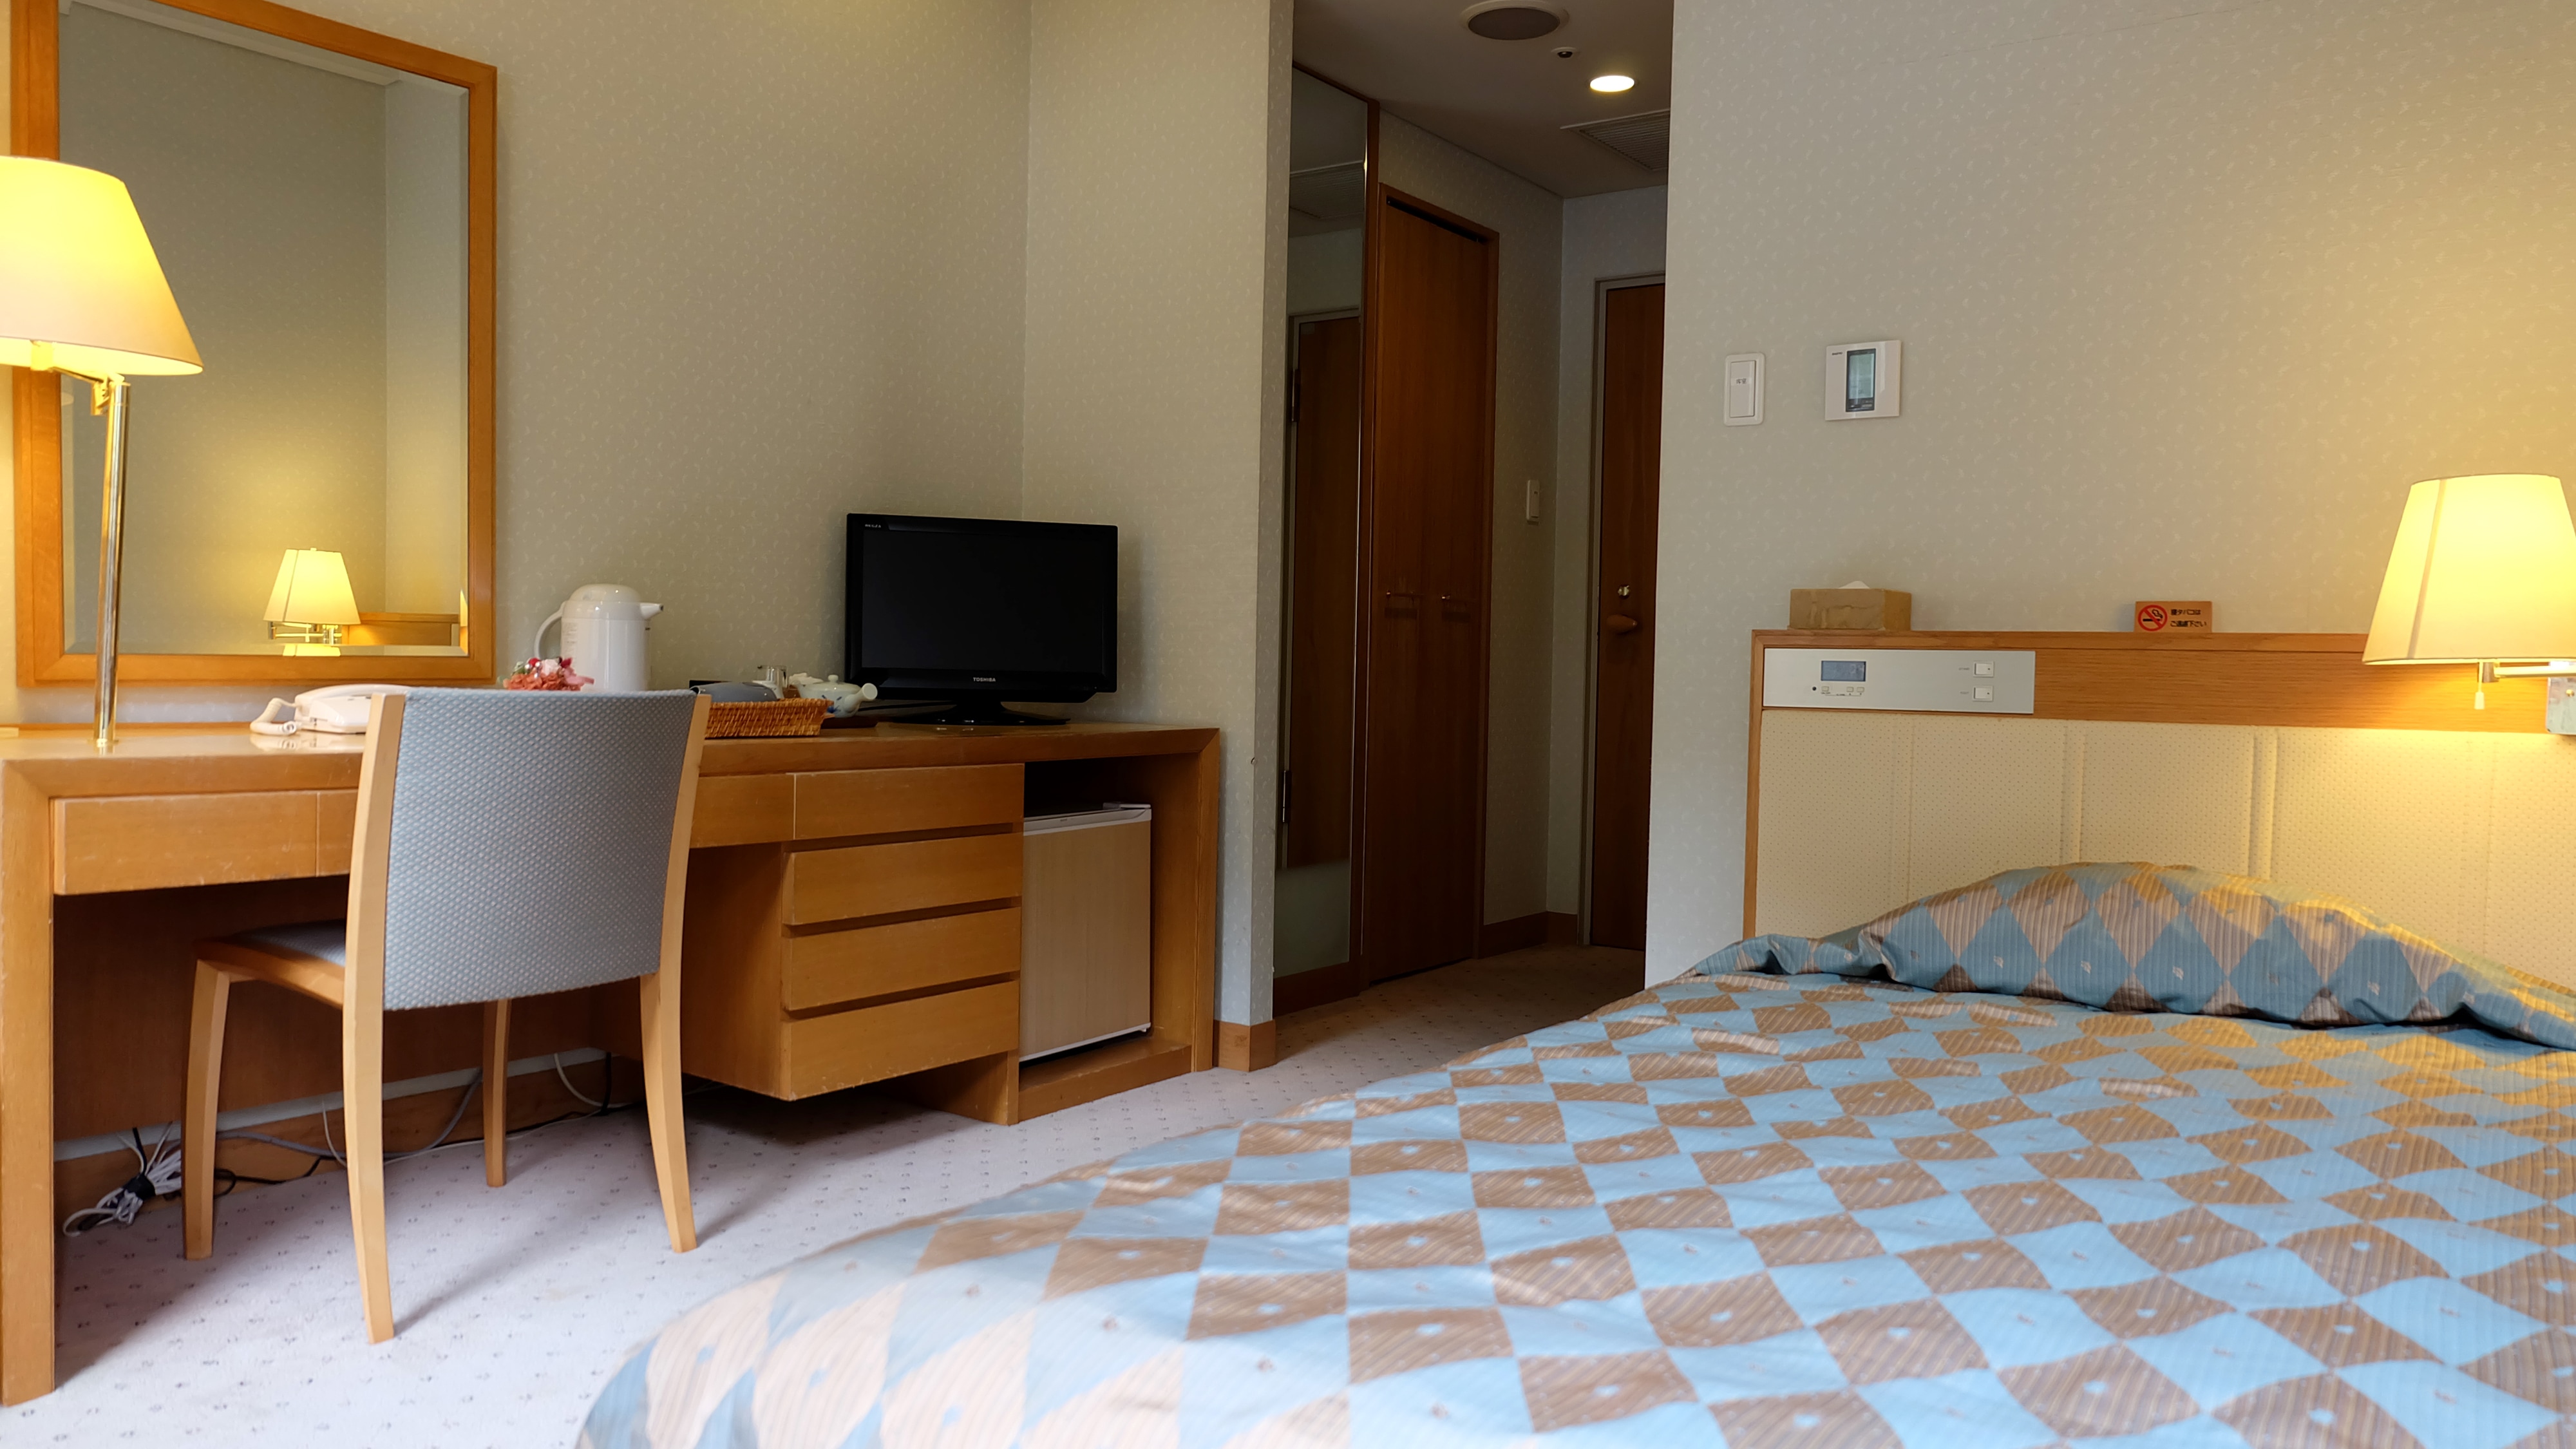 Western-style single room (11.2㎡) ◆ There is no view from the room, but it is a popular room for traveling alone.